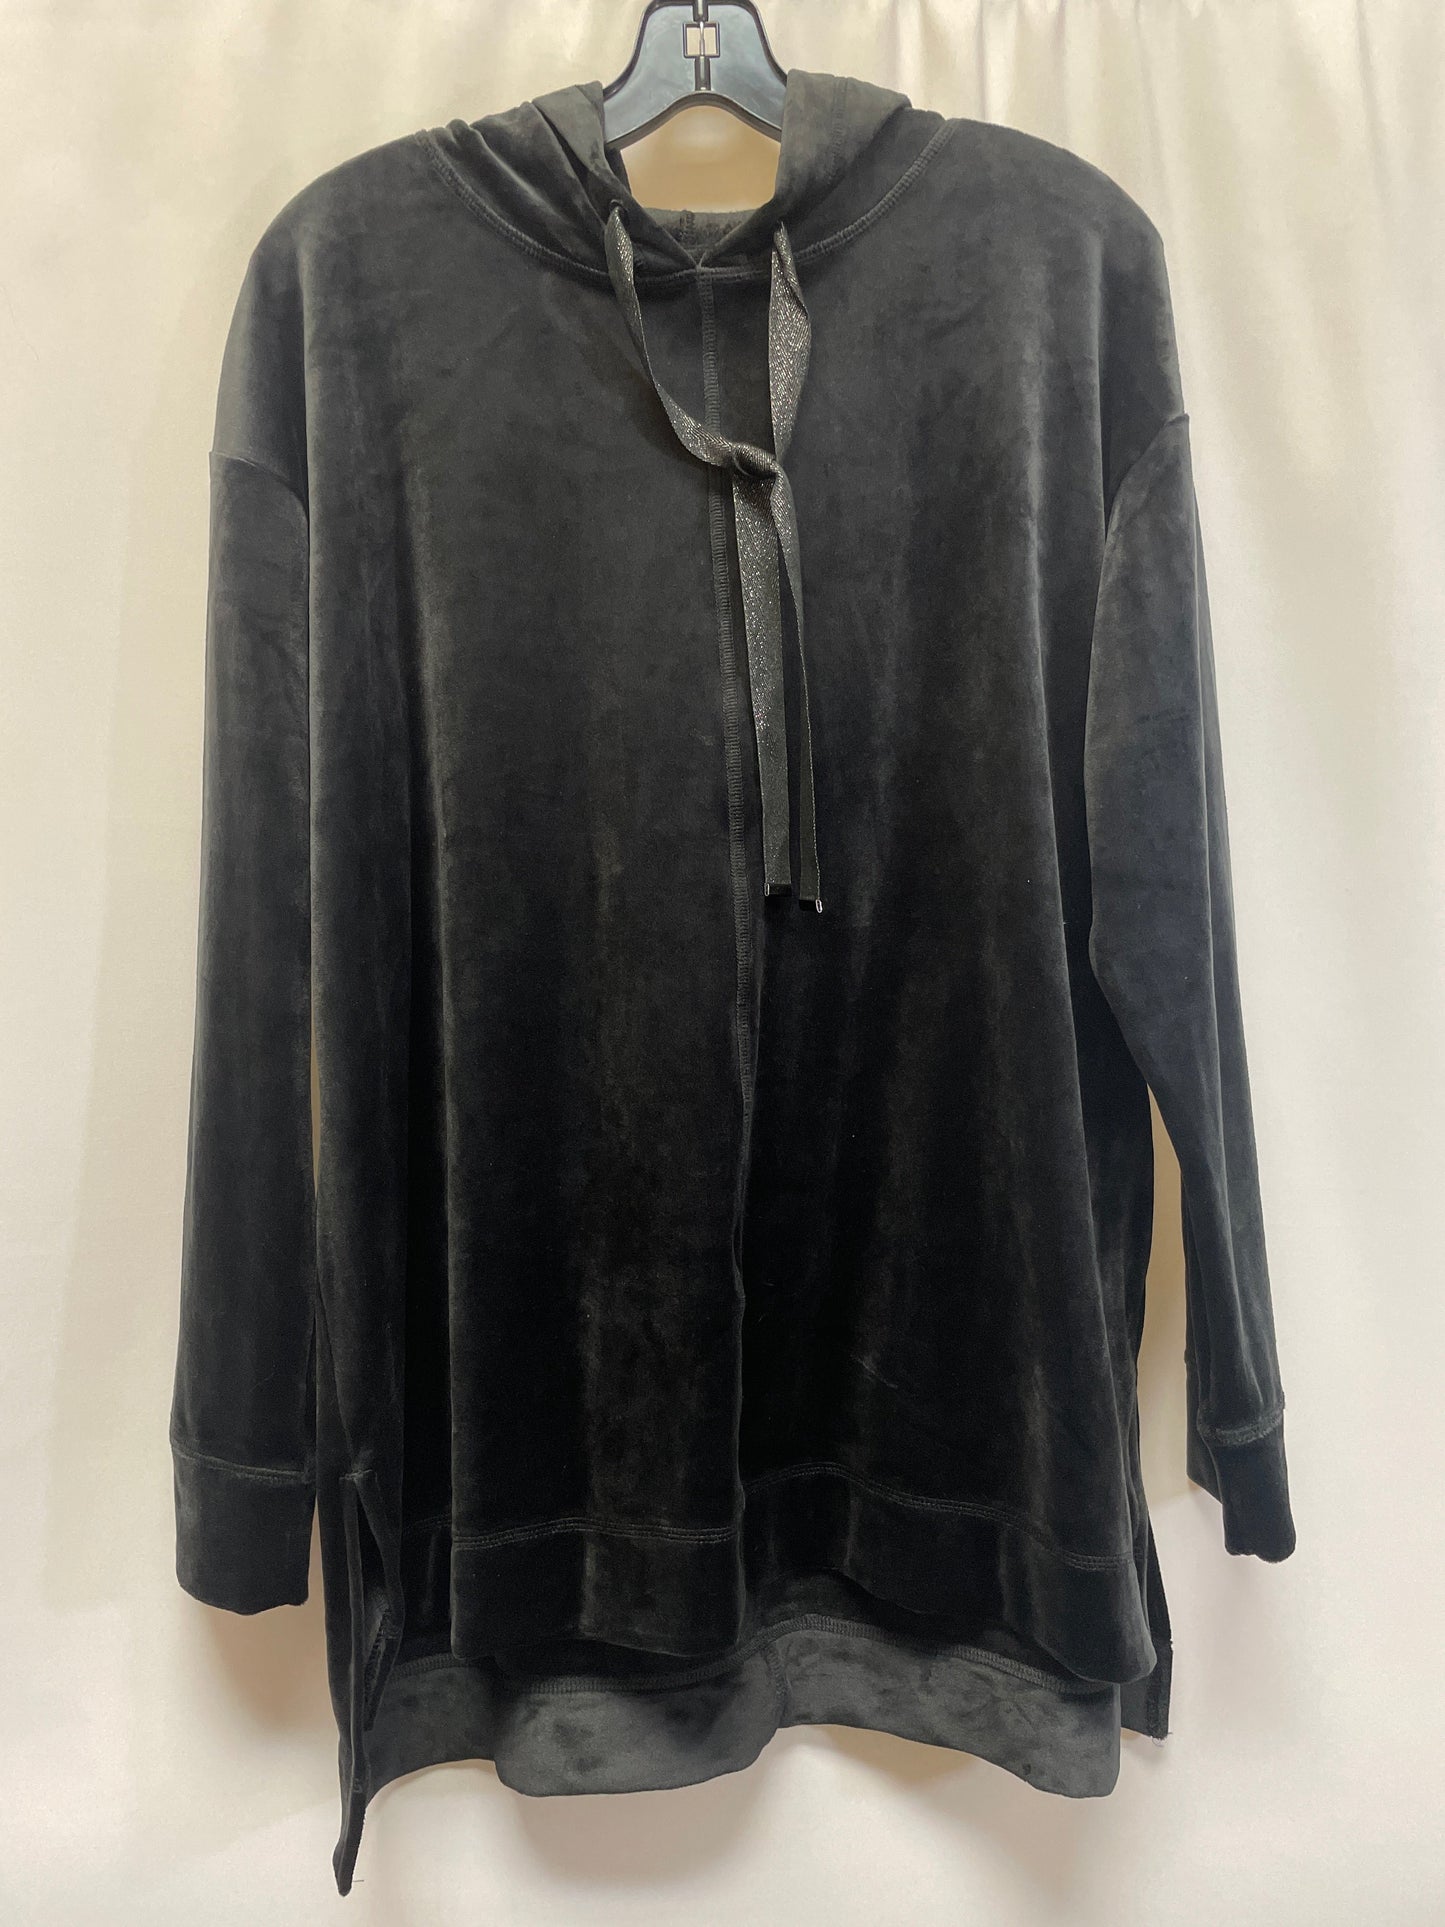 Black Top Long Sleeve Chicos, Size L